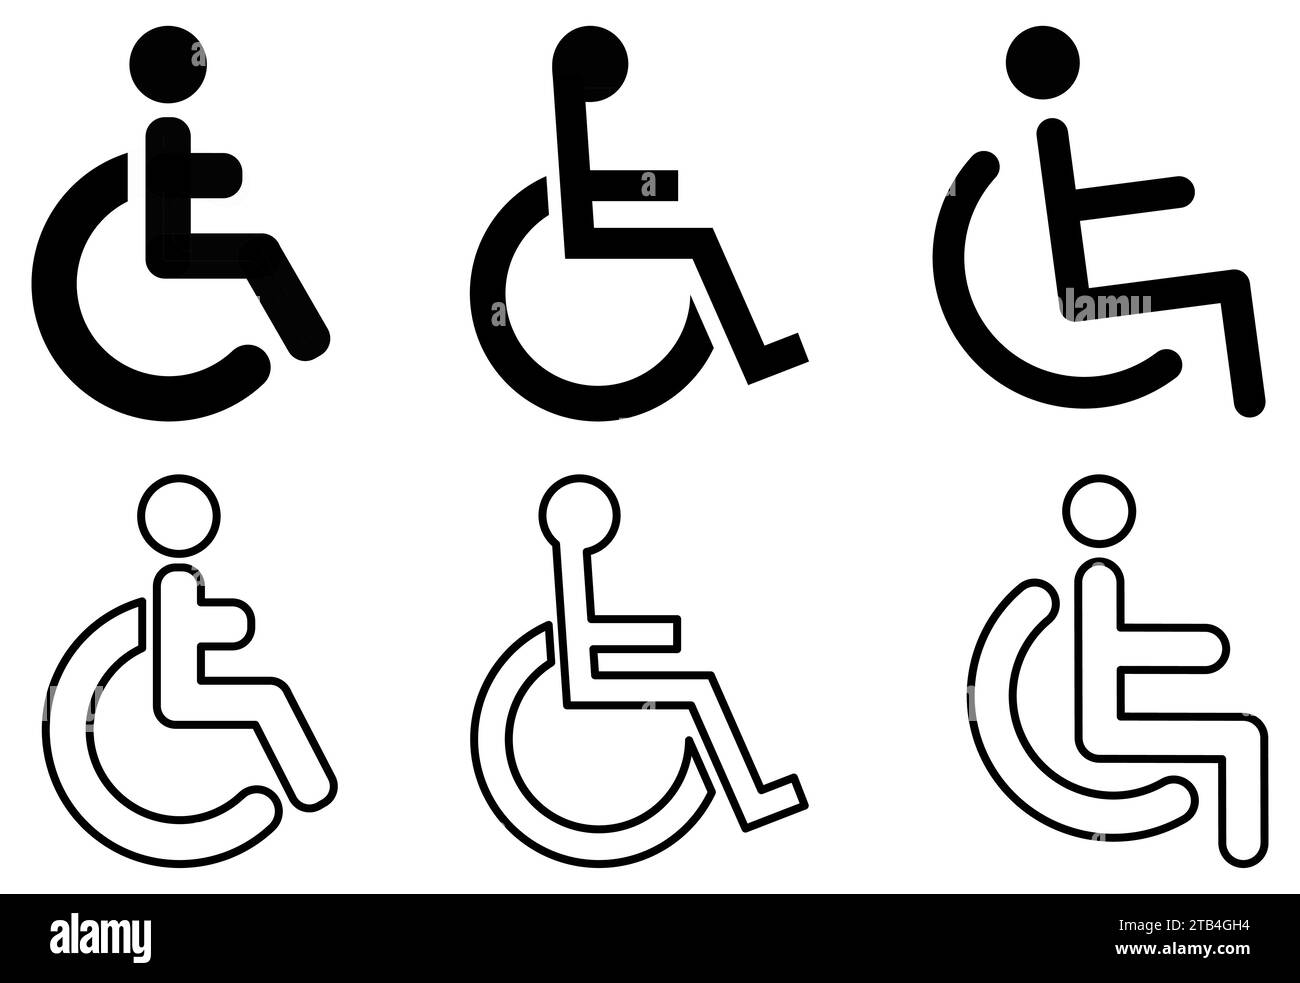 Simple disabled icon, person in wheelchair pictogram. Three filled and outline versions Stock Vector